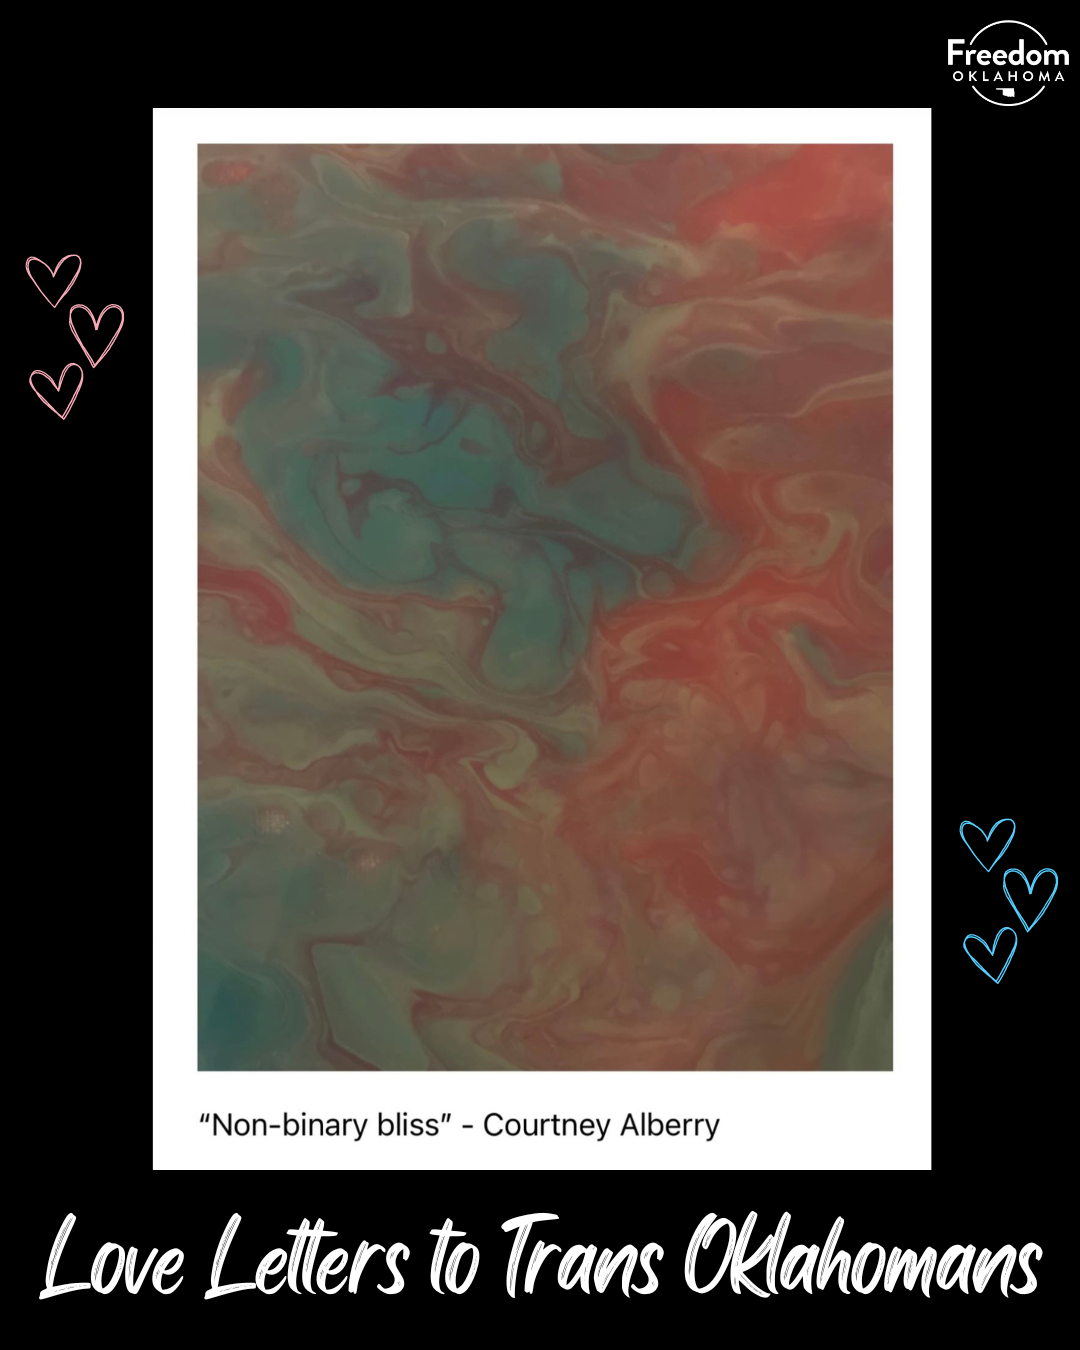  Black background with "Love Letters to Trans Oklahomans" at the bottom and in the center is the piece titled "Non-binary bliss" by Courtney Alberry. Abstract painting that looks wavy with blue, white, and pink. 